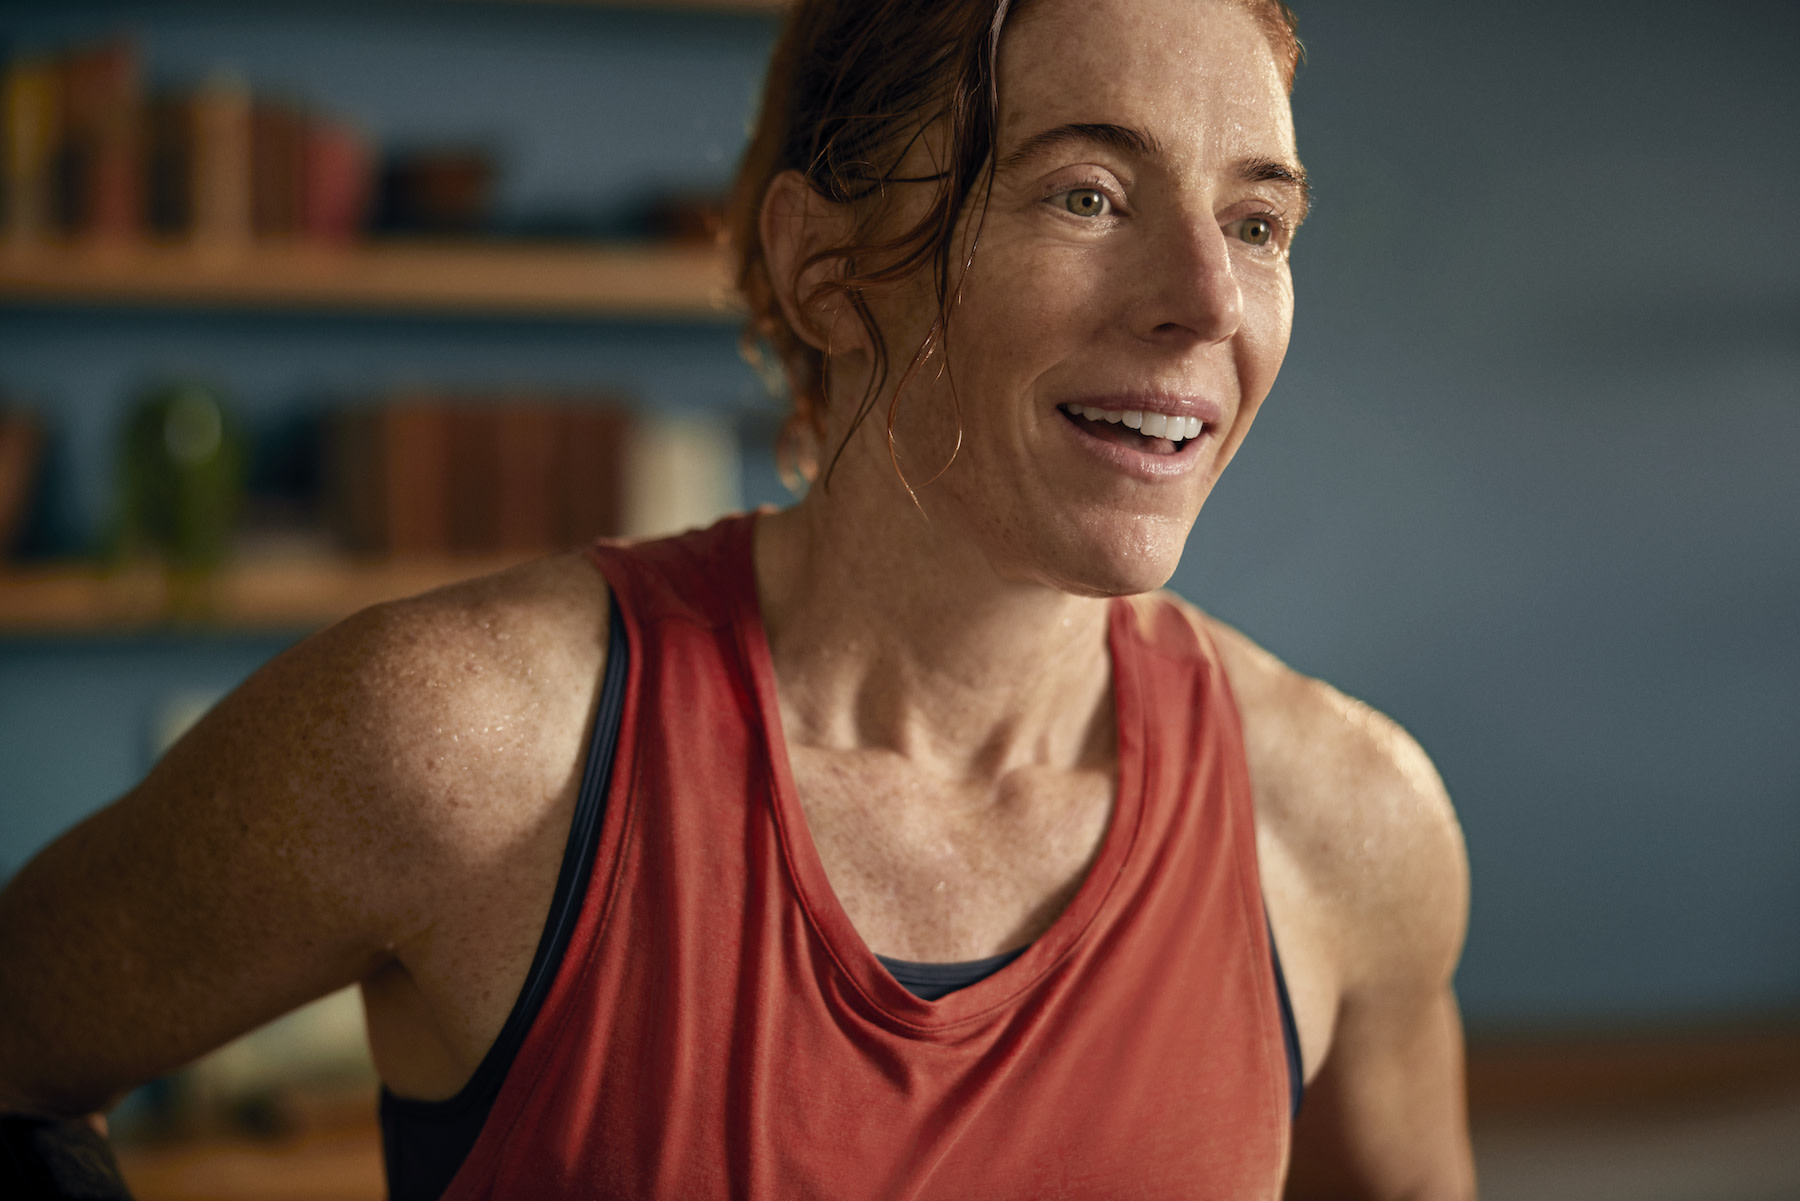 A woman smiling after finishing a home workout. She is sweaty and wearing a red tank top.